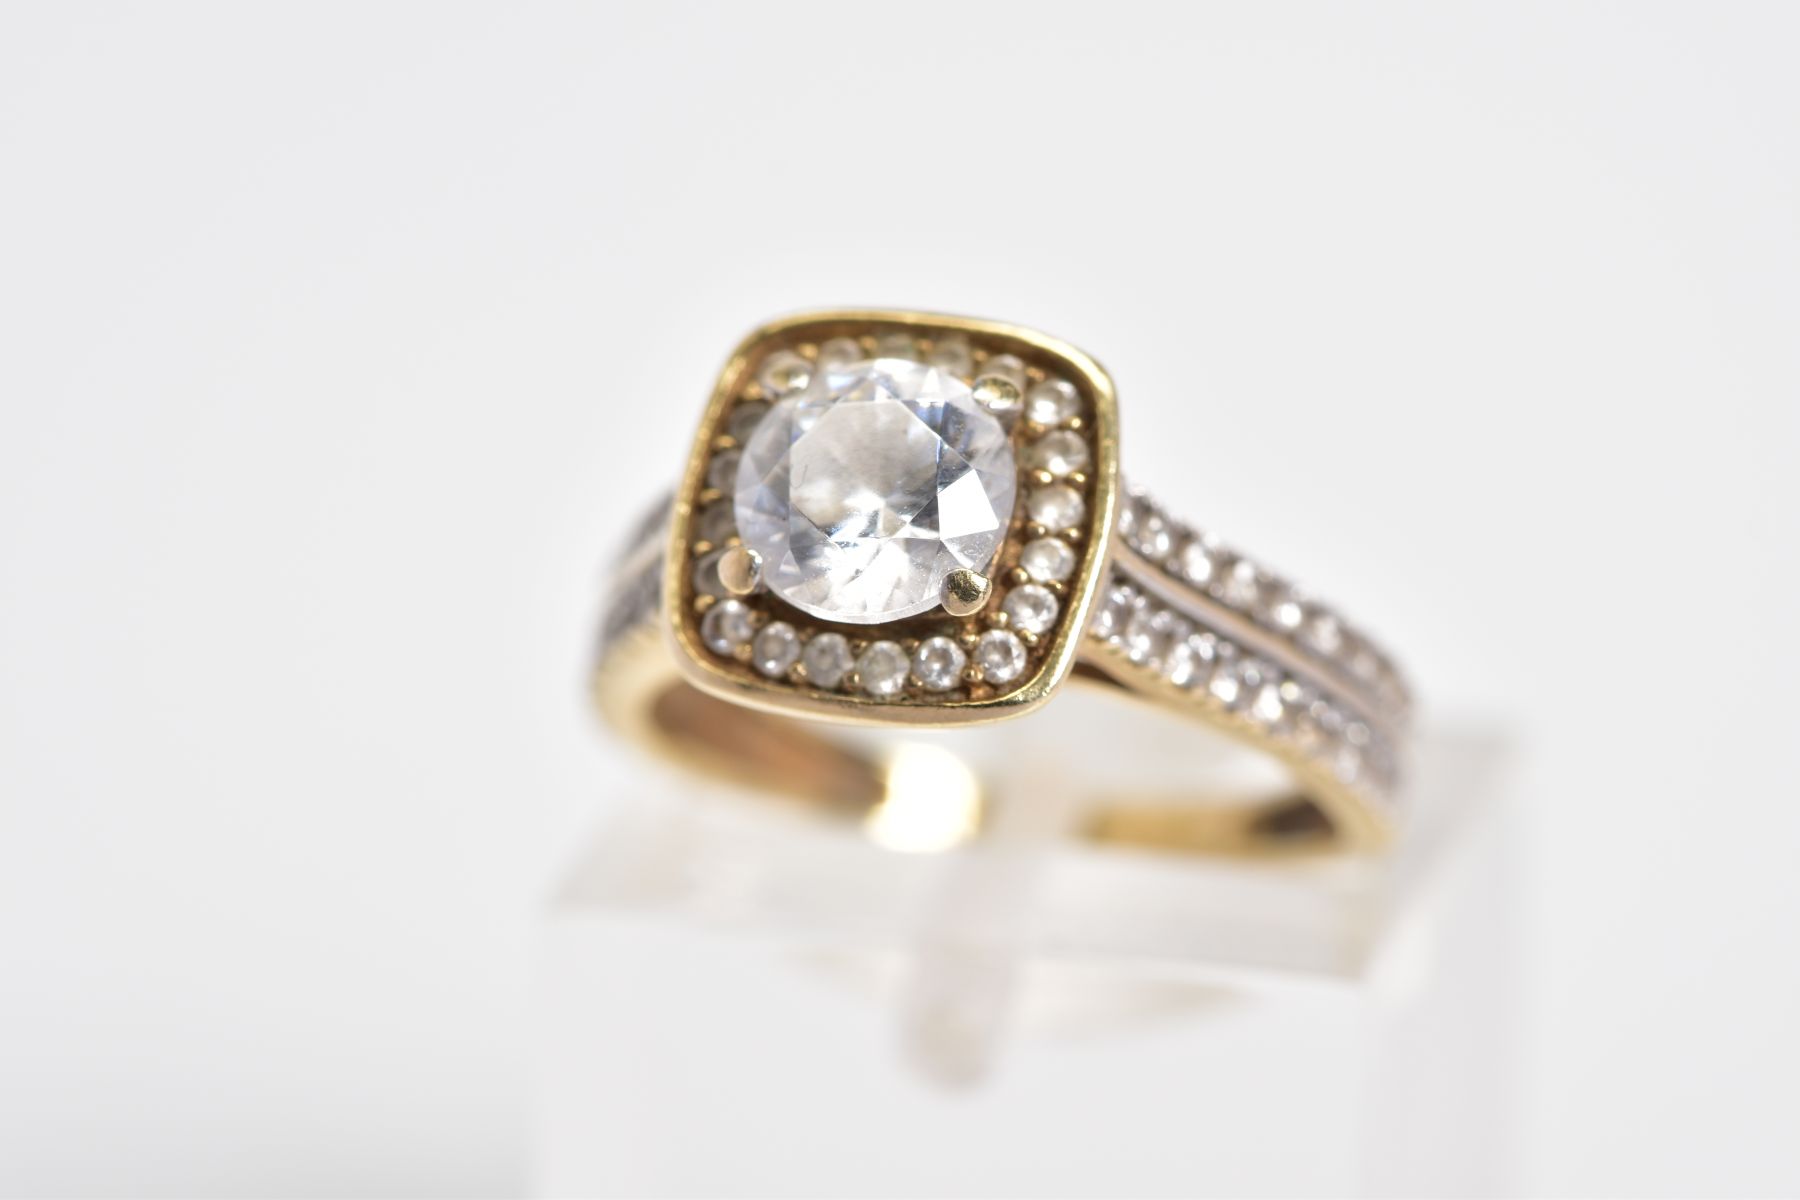 A 9CT GOLD CUBIC ZIRCONIA SET RING, designed with a raised central square panel set with a